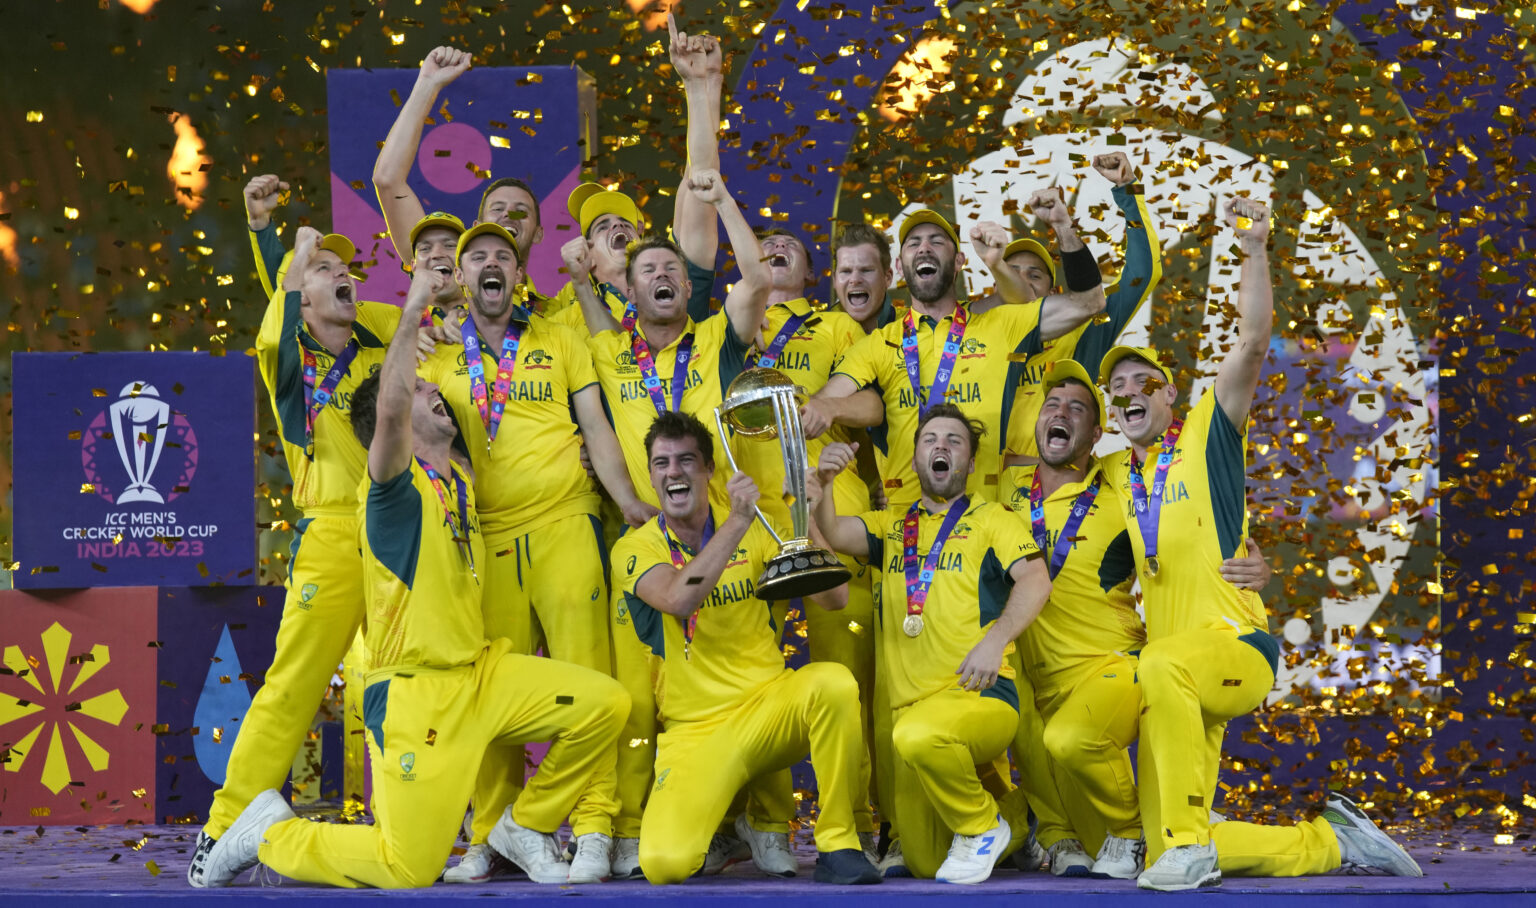 Heartbreak for Kohli and India as Australia wins the Cricket World Cup